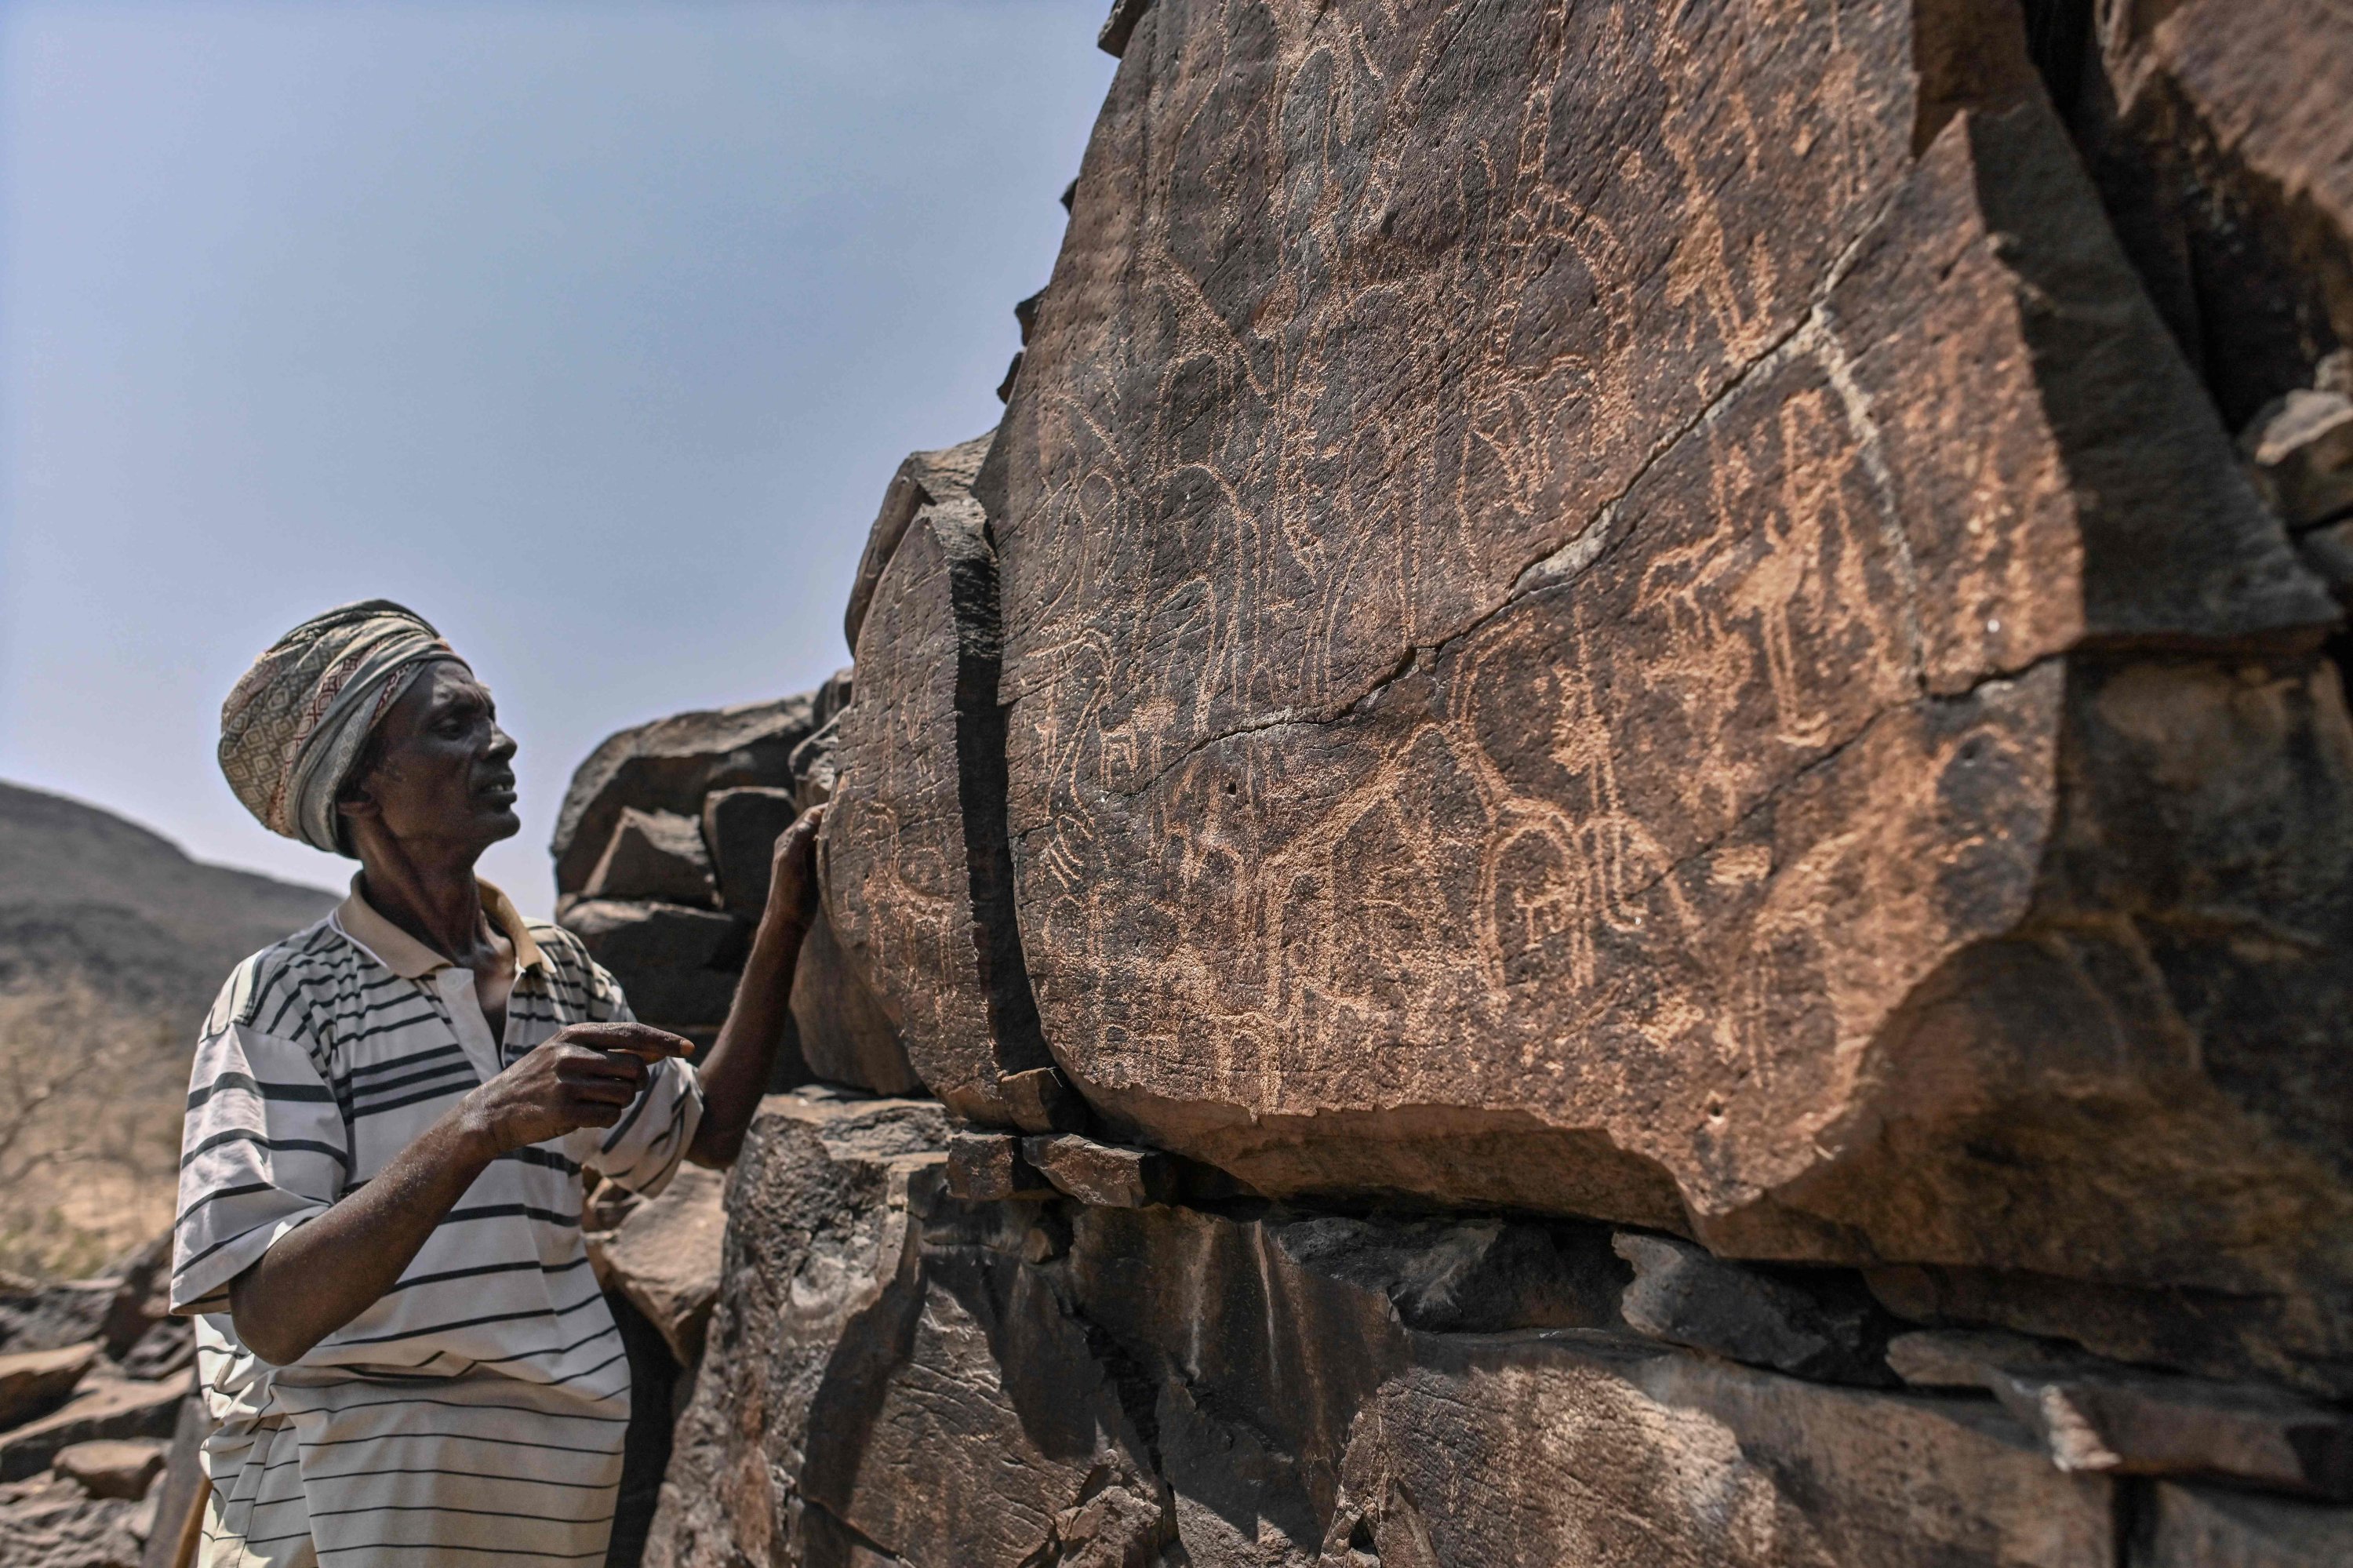 Ibrahim Dabale, 50, an art guardian and native of Djibouti, narrates on ancient depictions at the remote Abourma Rock Art site in the Makarassou Massif of Tadjoura Region, nothern Djibouti, April 13, 2021. (AFP Photo)